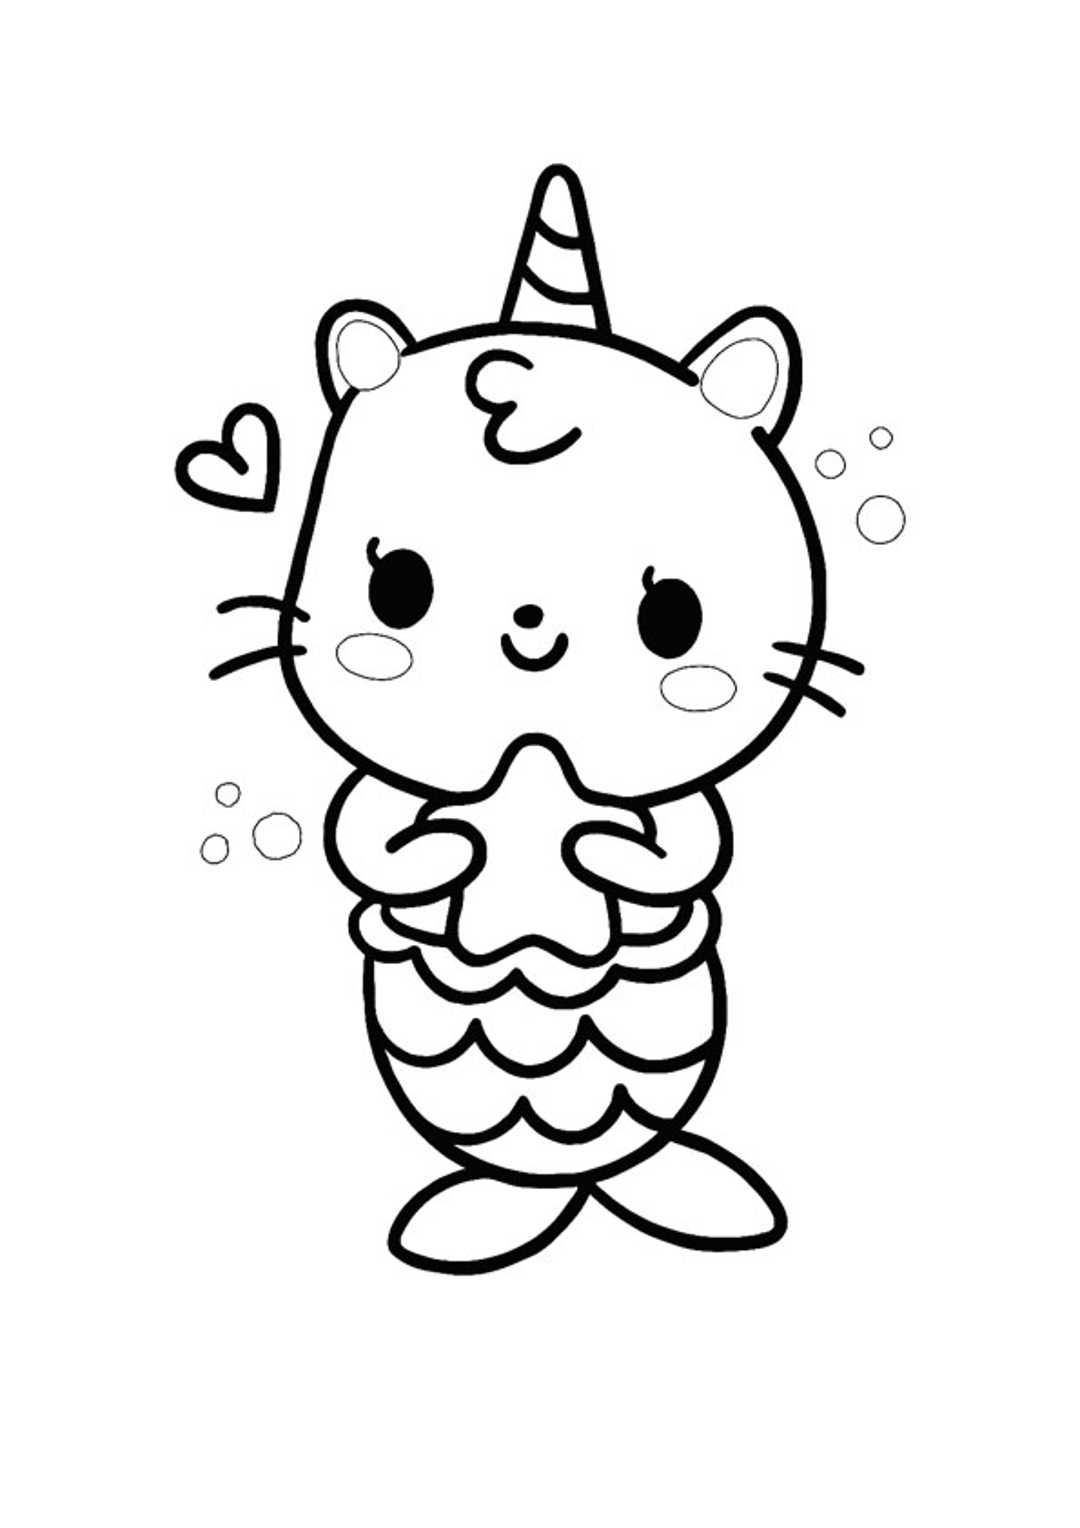 Unicorn Cat Mermaid Coloring Pages   Cat Coloring Pages   Coloring ...